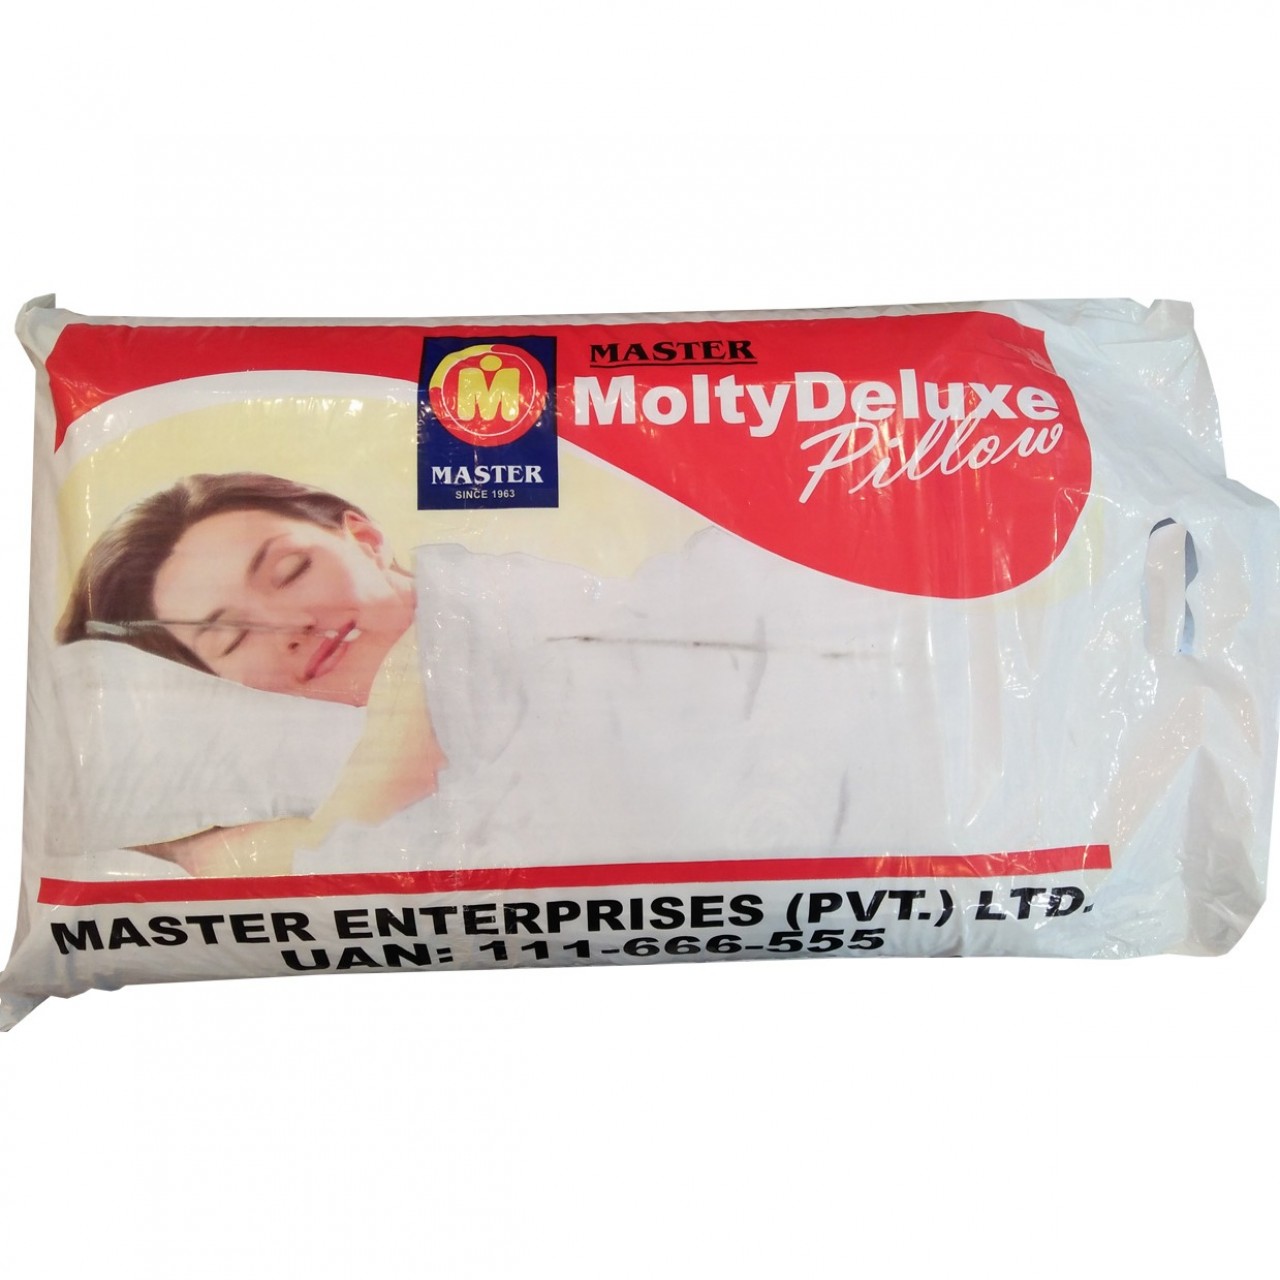 Master Molty Deluxe Pillow - Soft & Comfortable